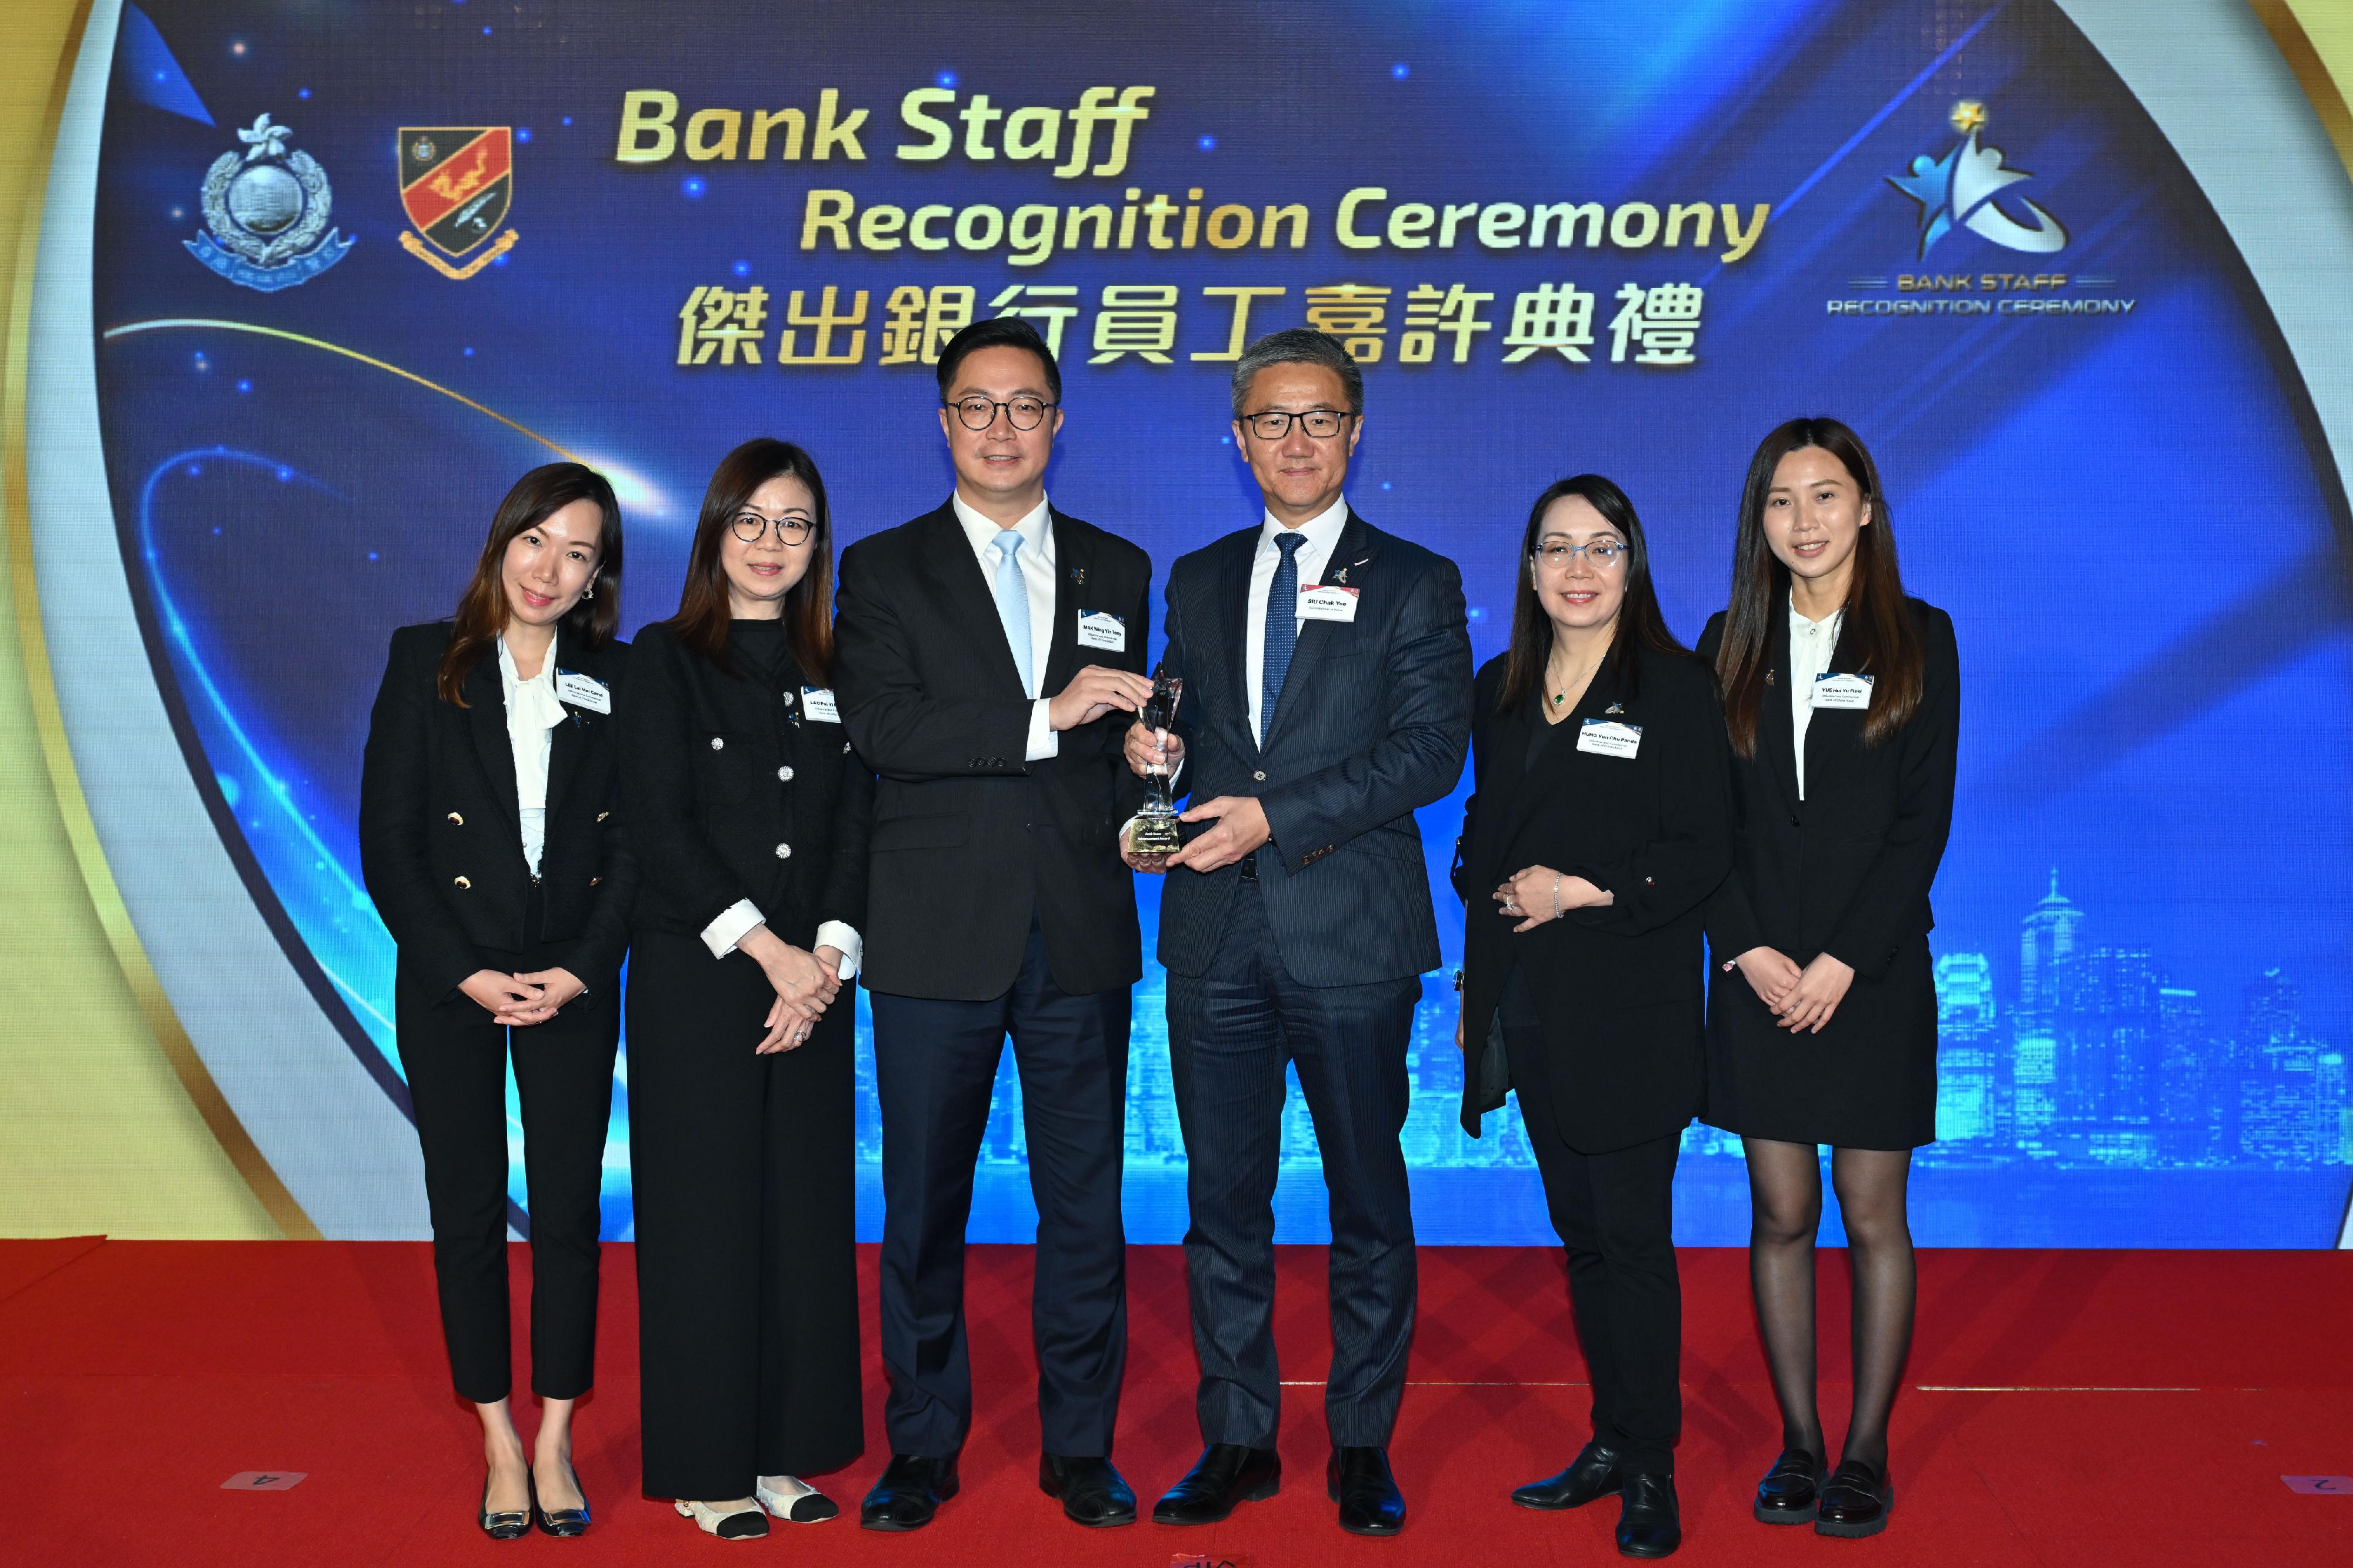 The Bank Staff Recognition Ceremony organised by the Hong Kong Police Force was held today (March 22). Photo shows the Commissioner of Police, Mr Siu Chak-yee (third right), presenting the Anti-Scam Advancement Award to the bank representatives.